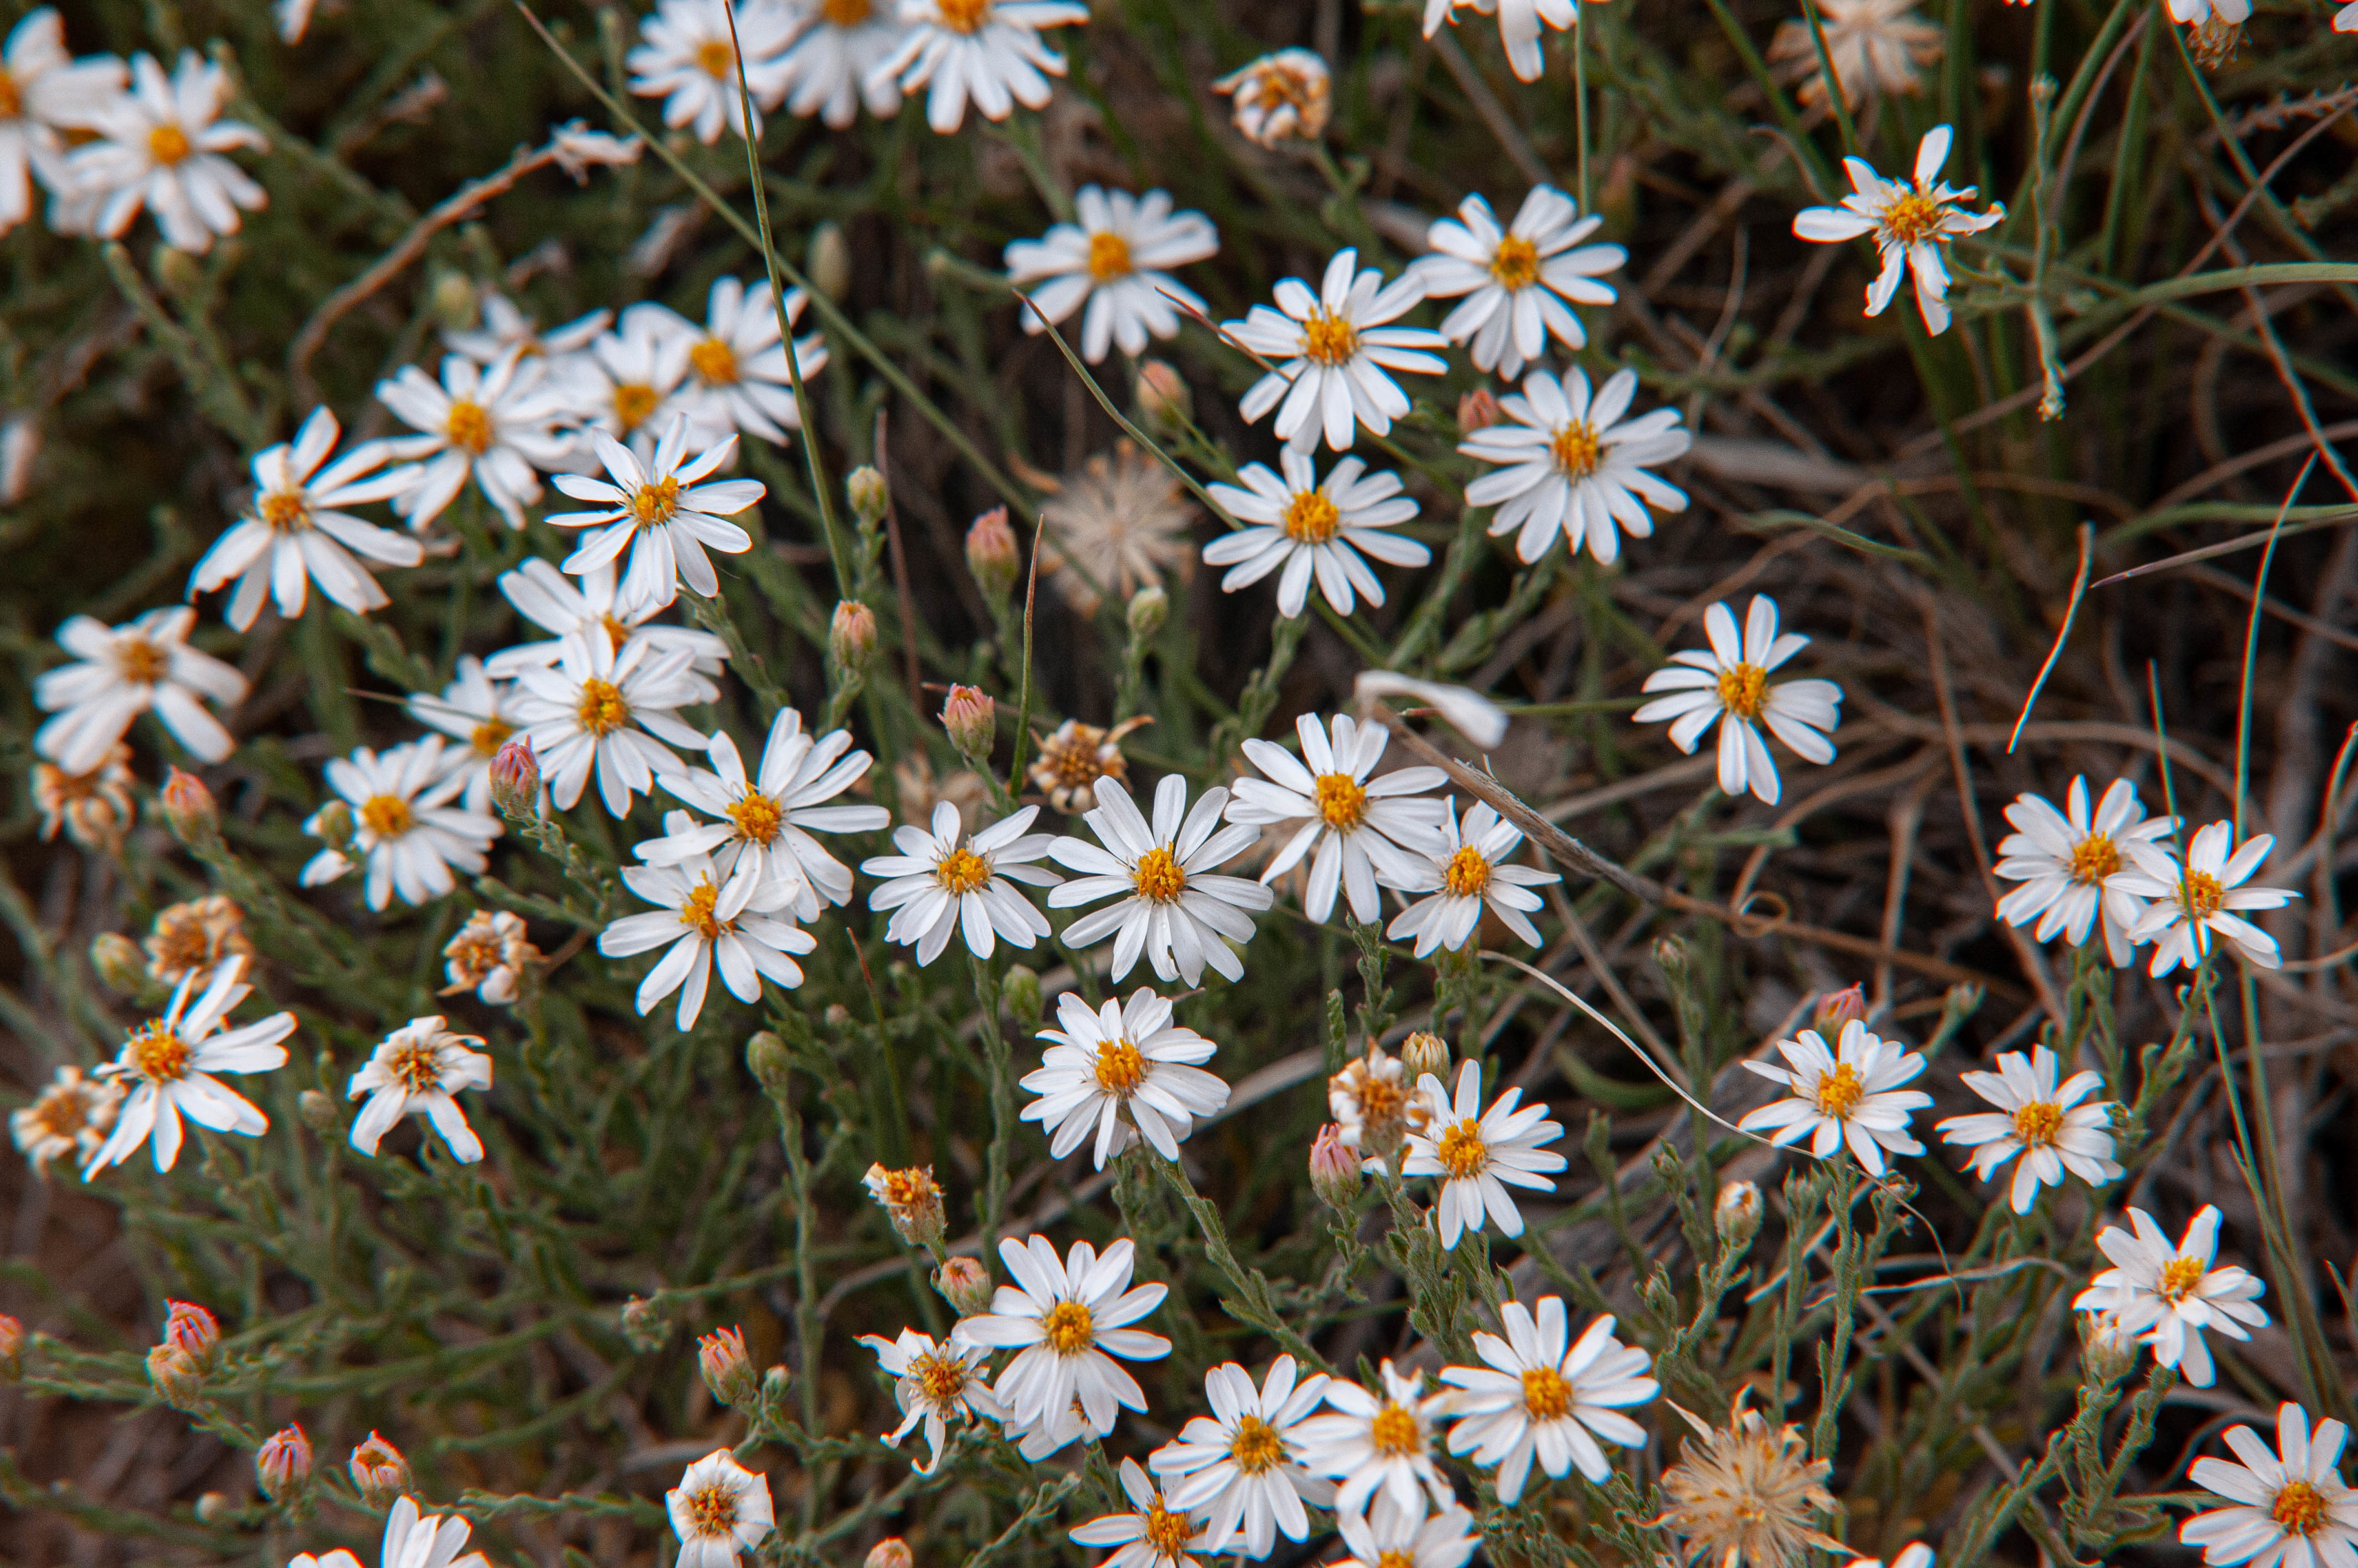 Close-up of tiny white flowers in an outdoor field.